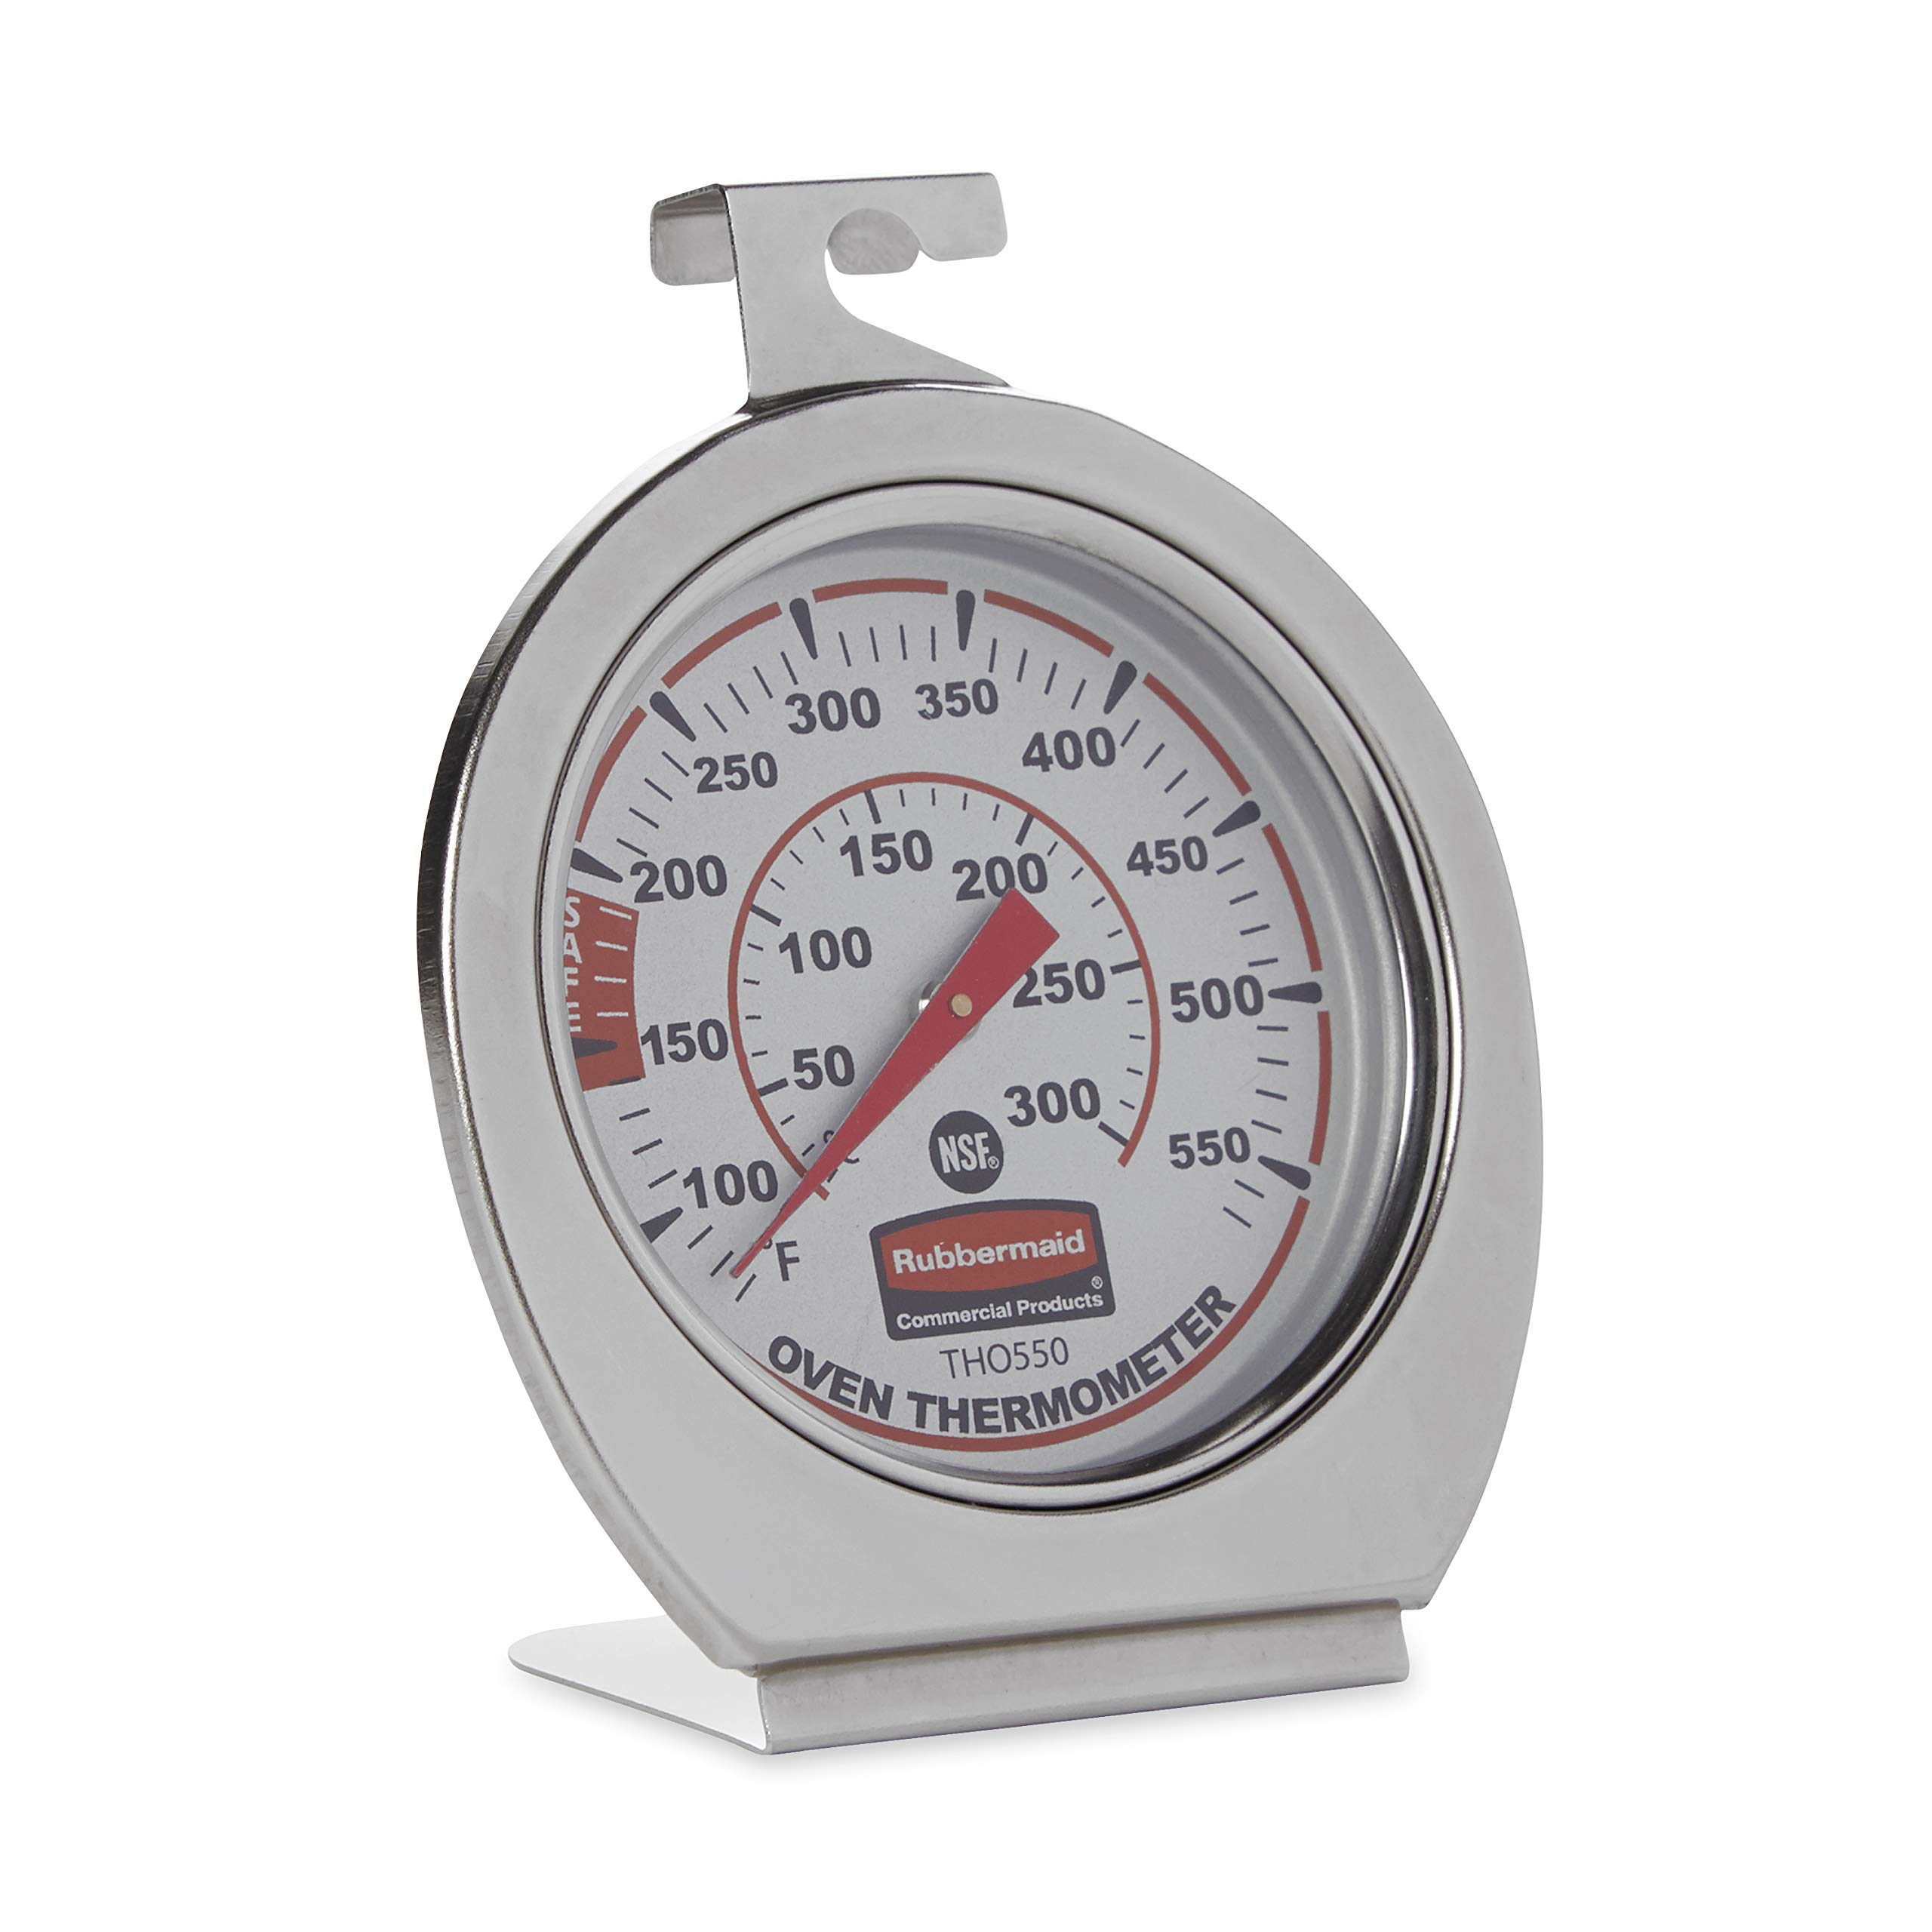 Rubbermaid Stainless Steel Oven Thermometer